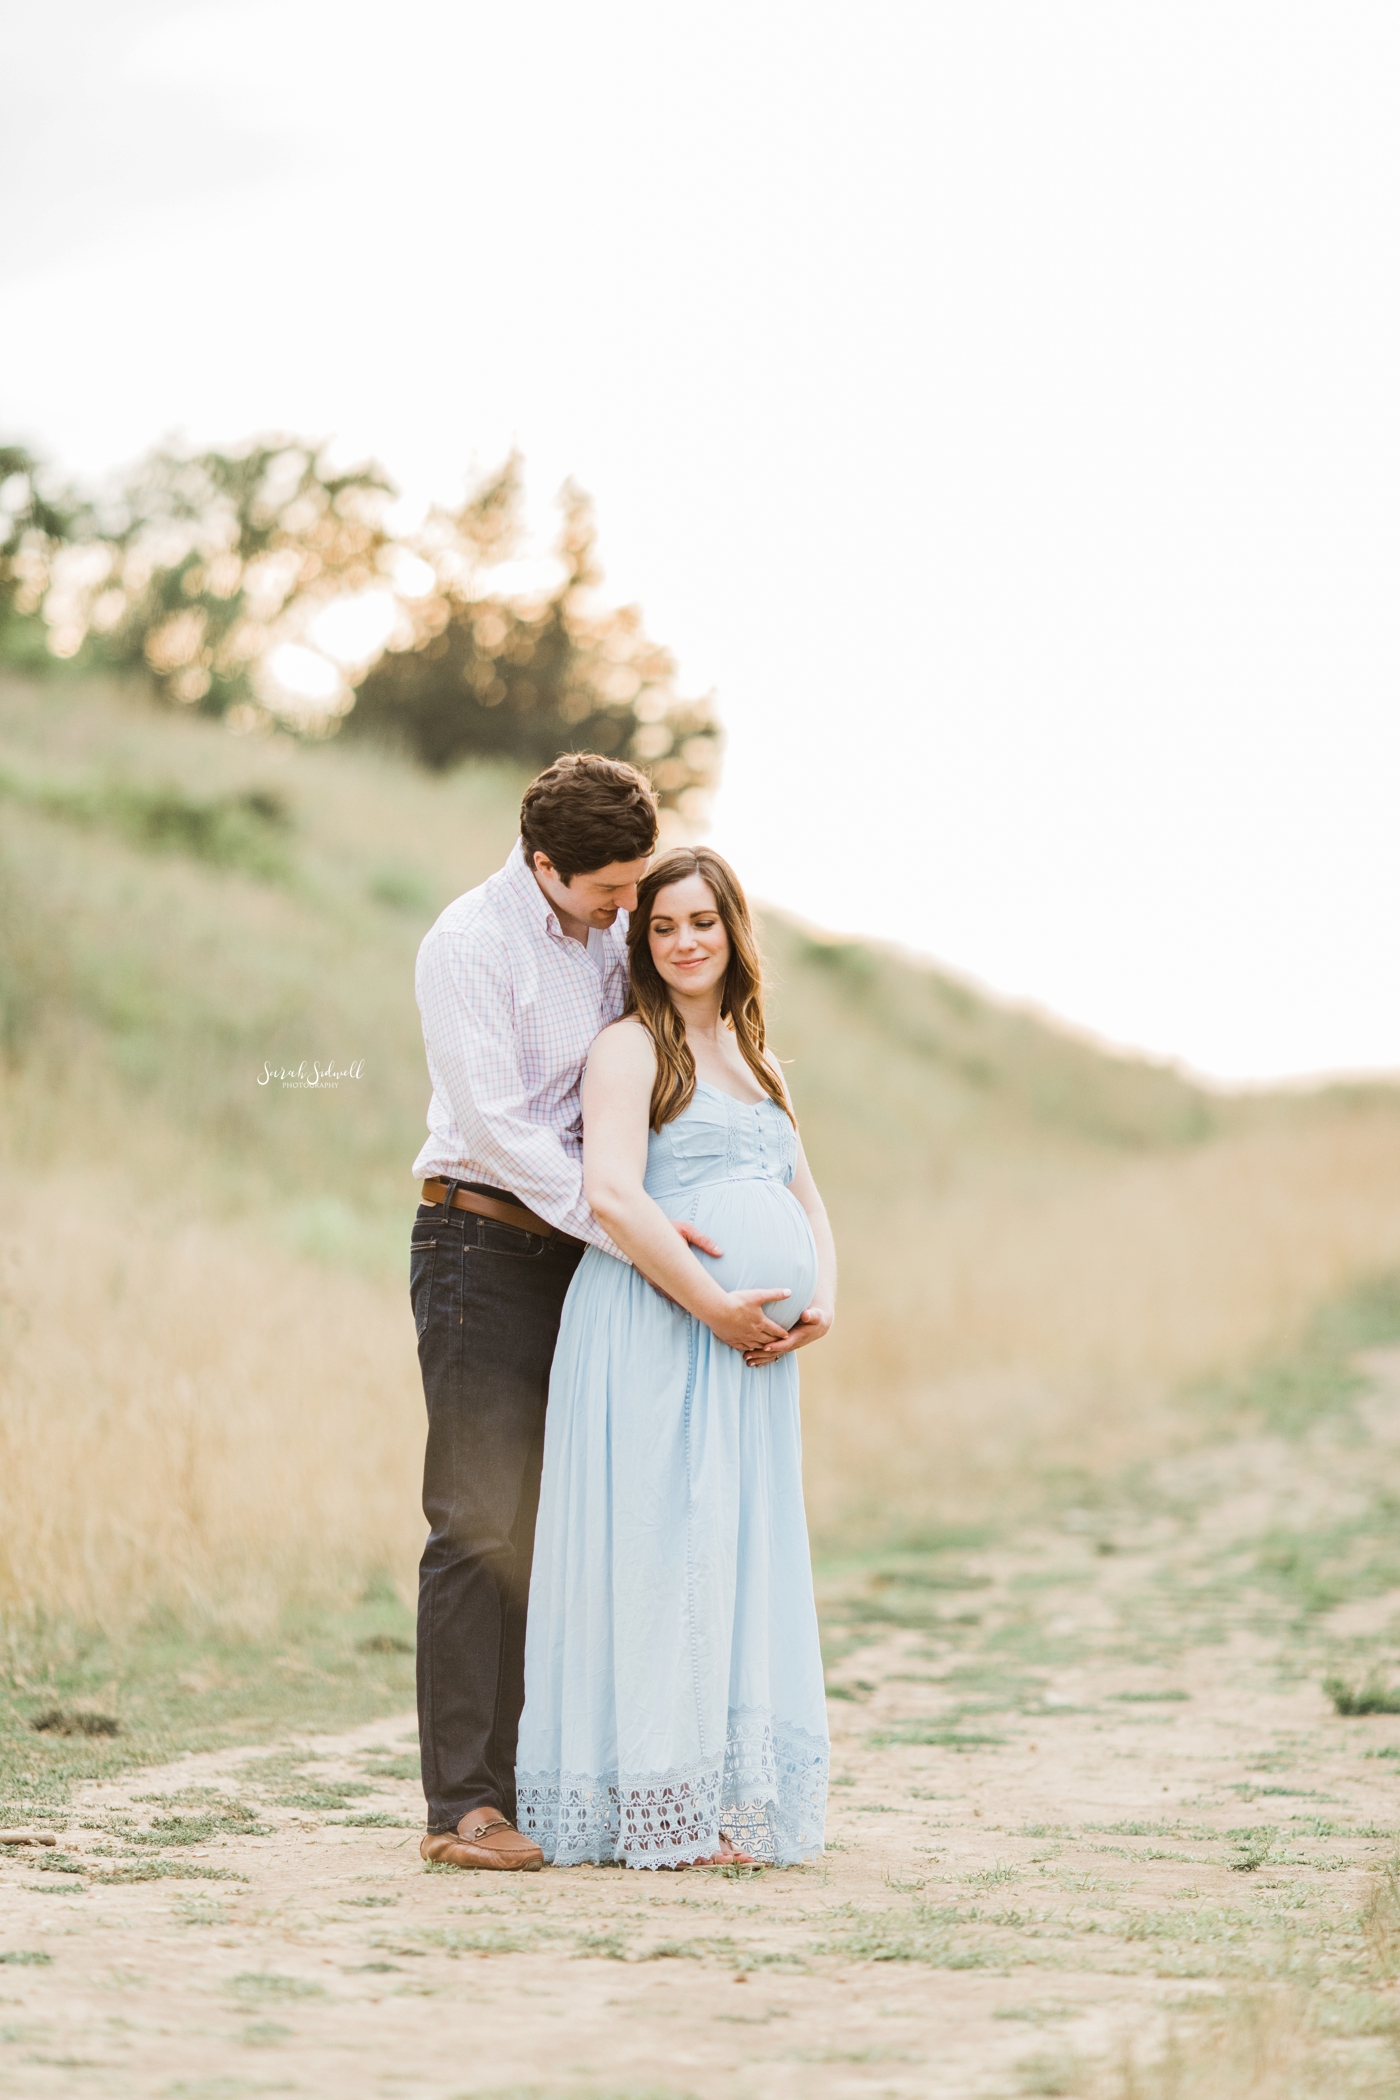 Nashville Maternity Photography | A Gift to Your Child